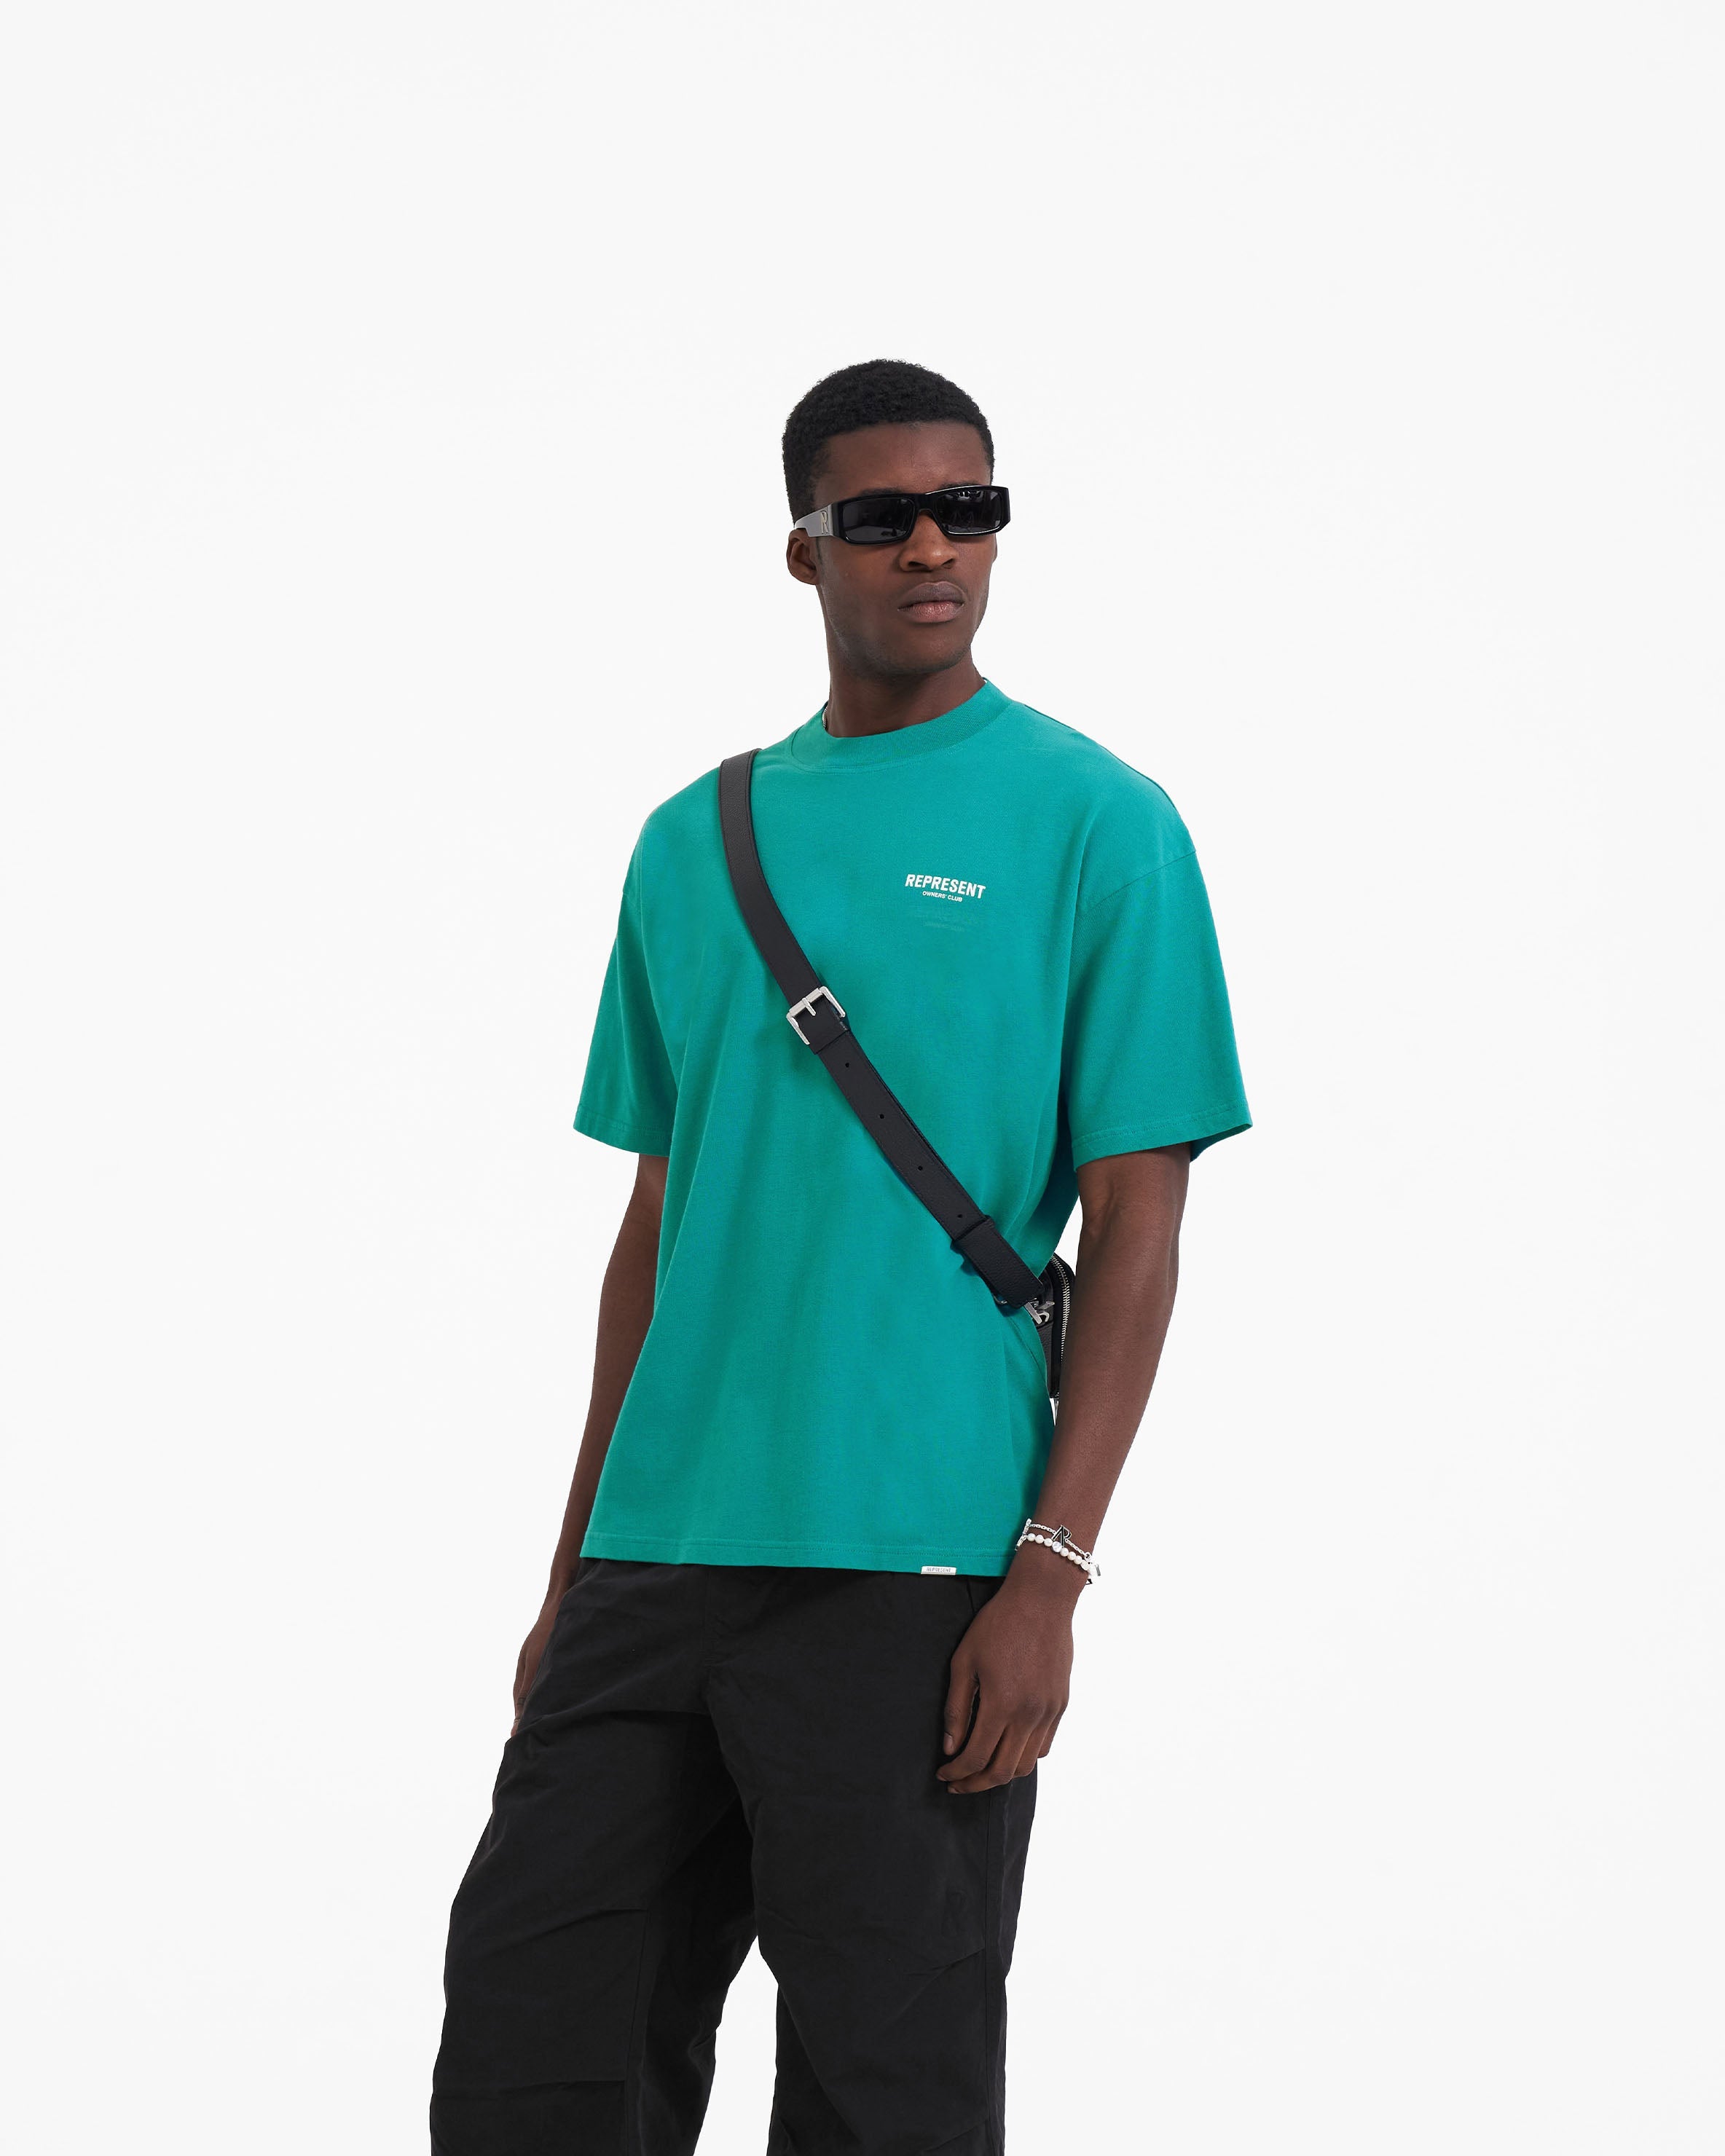 Represent Owners Club T-Shirt - Teal